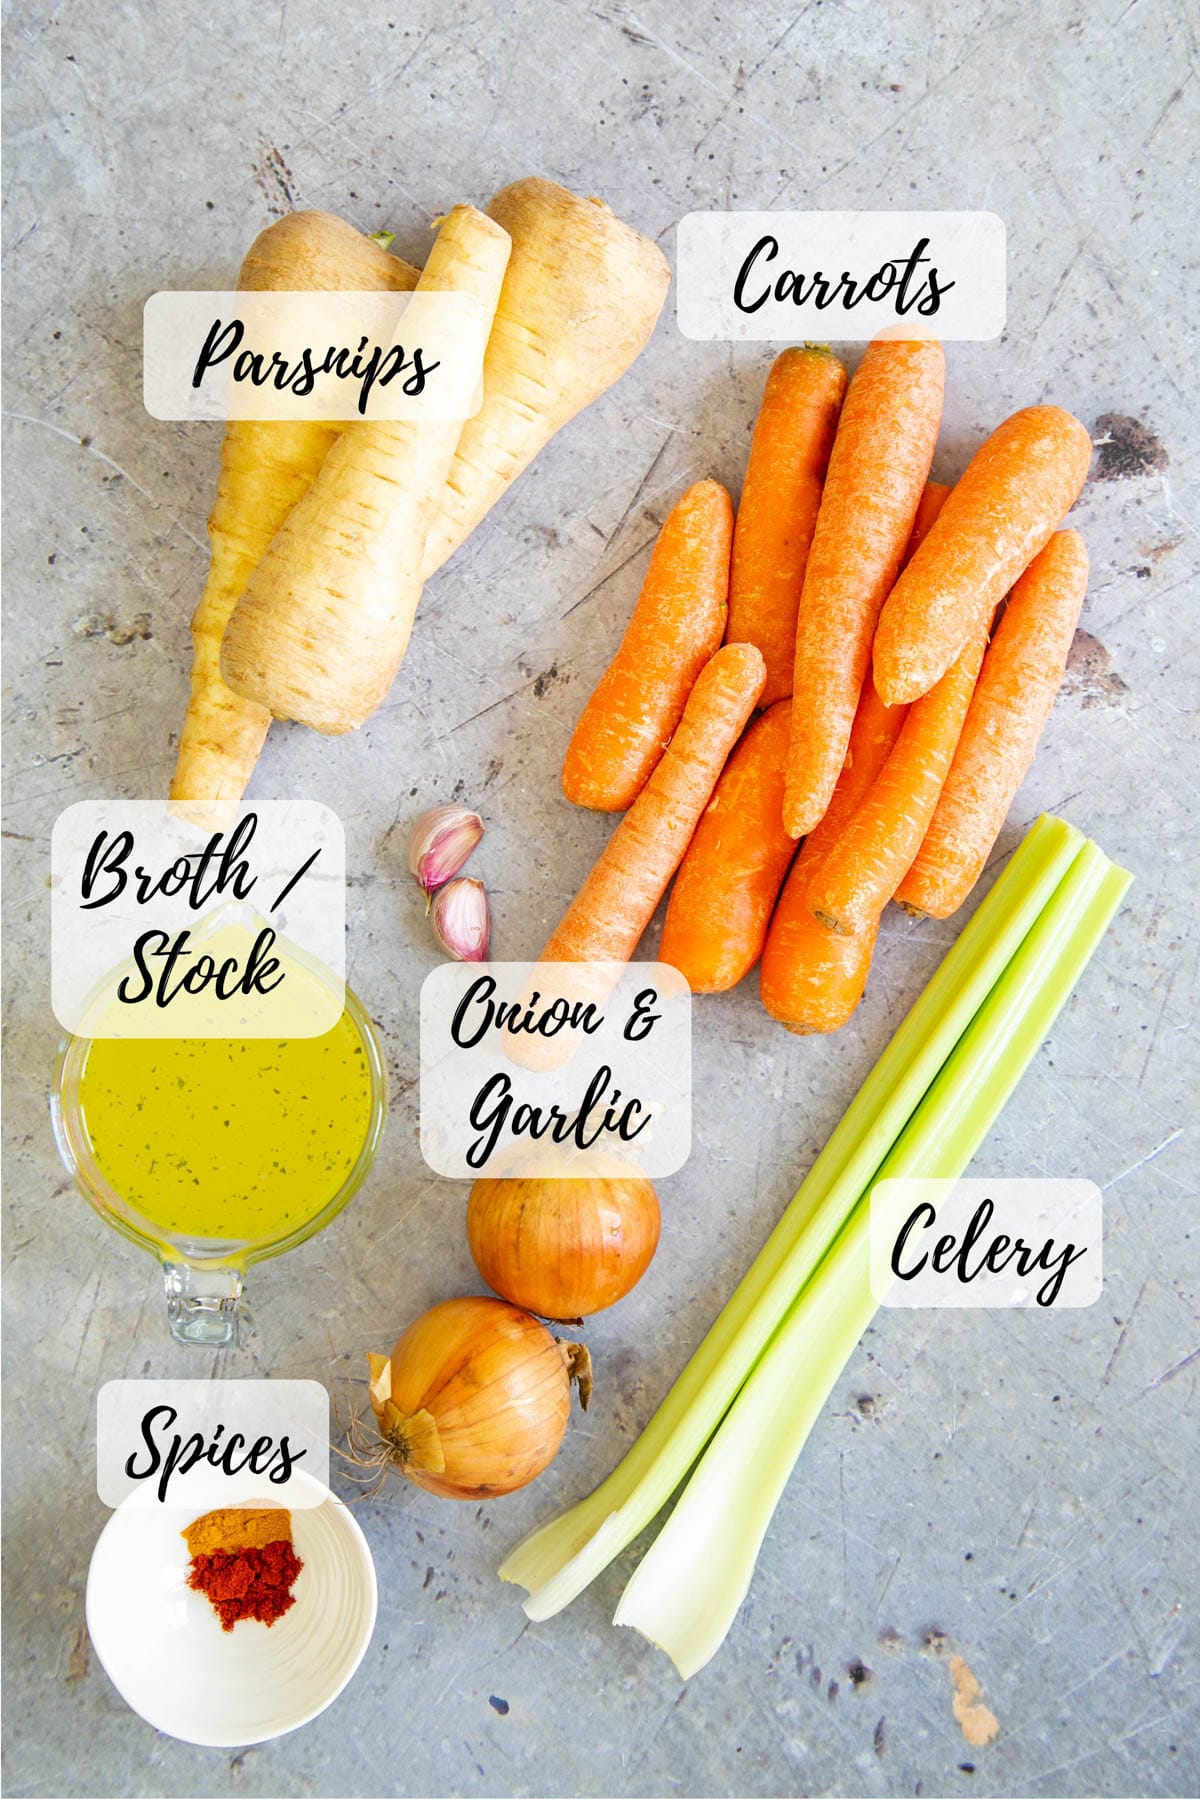 Ingredients for carrot and parsnip soup: parsnips, carrots, celery, onion and garlic, spices, stock